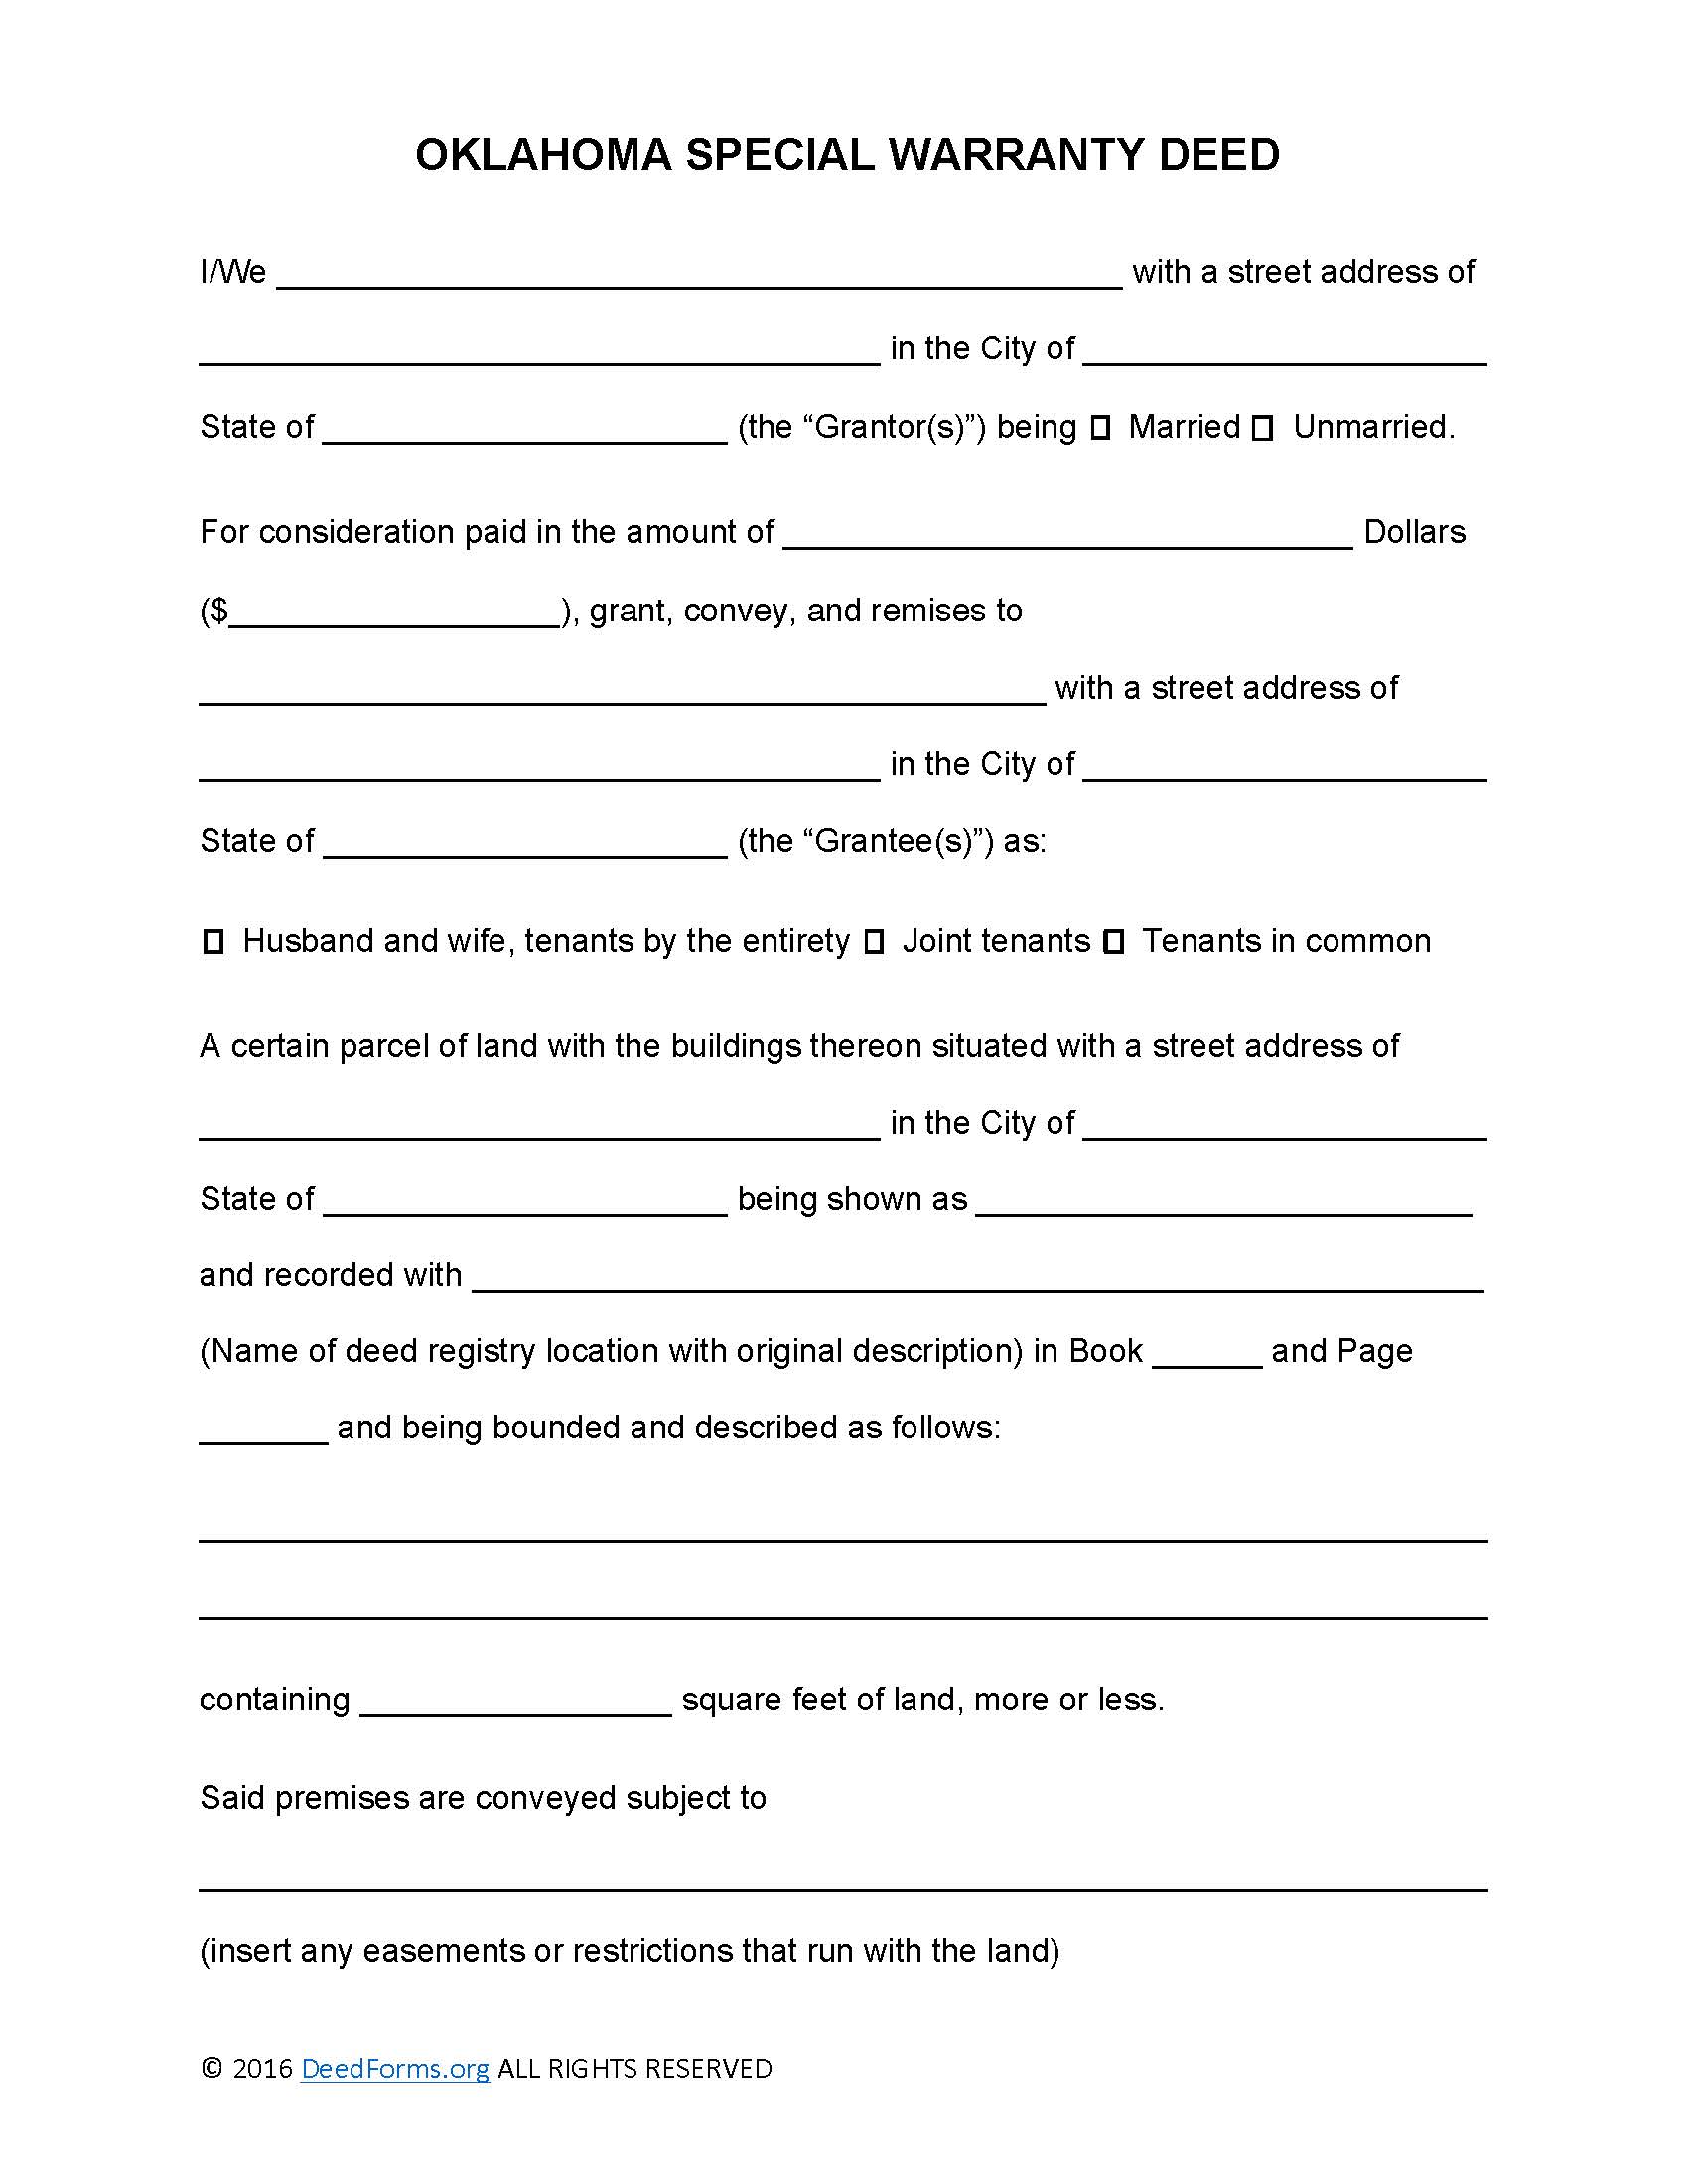 Oklahoma Special Warranty Deed Form Deed Forms Deed Forms